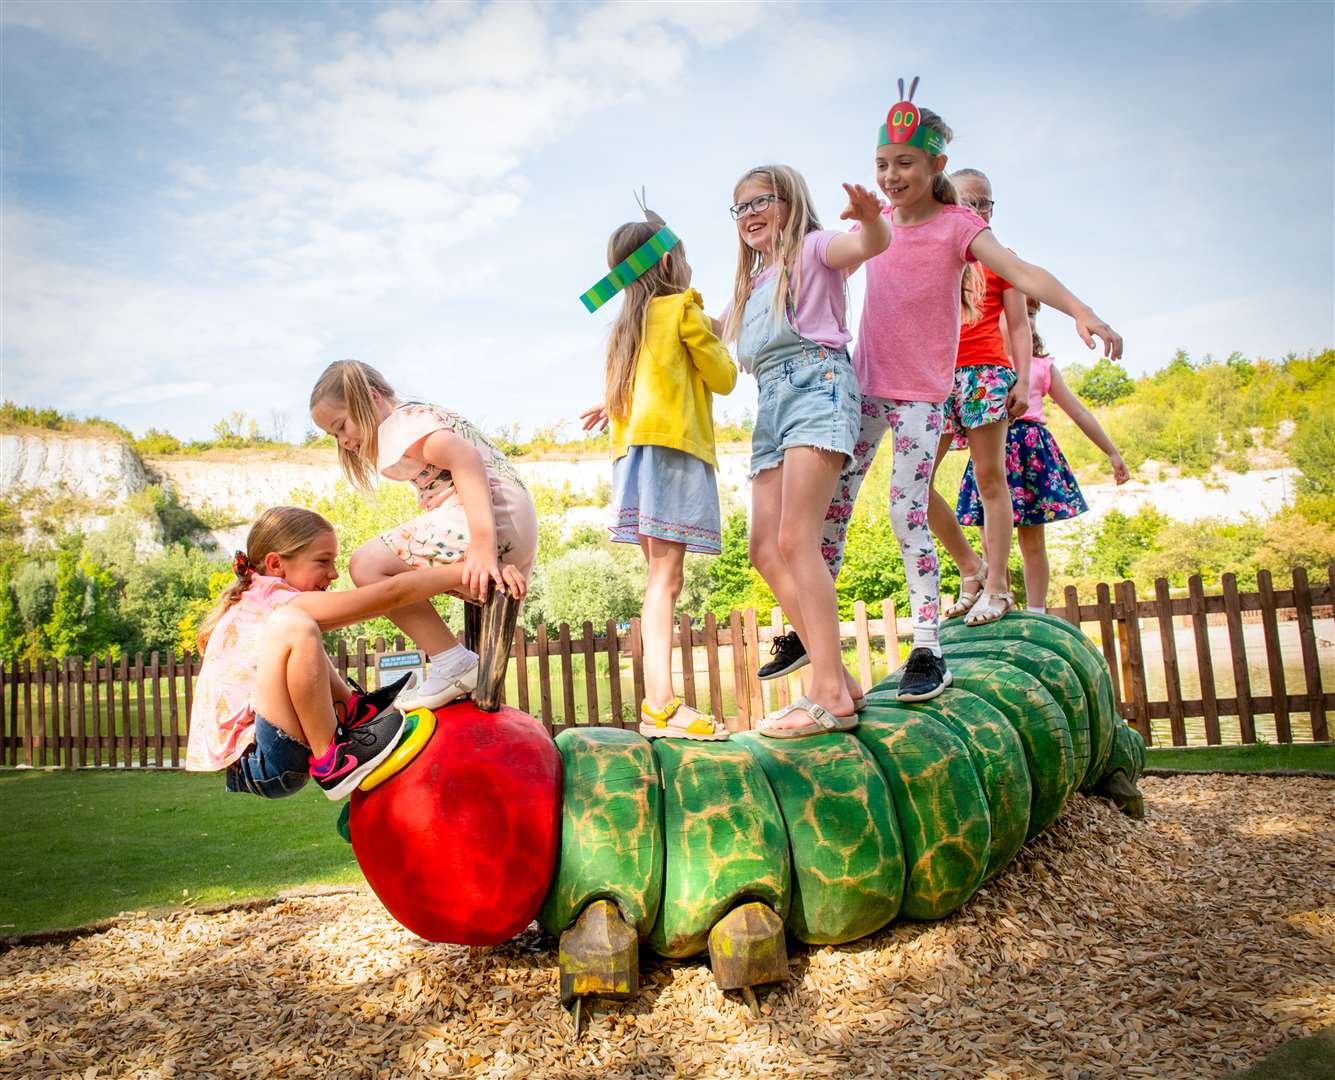 The Hungry Caterpillar nature trail is said to be undergoing a spooky transformation